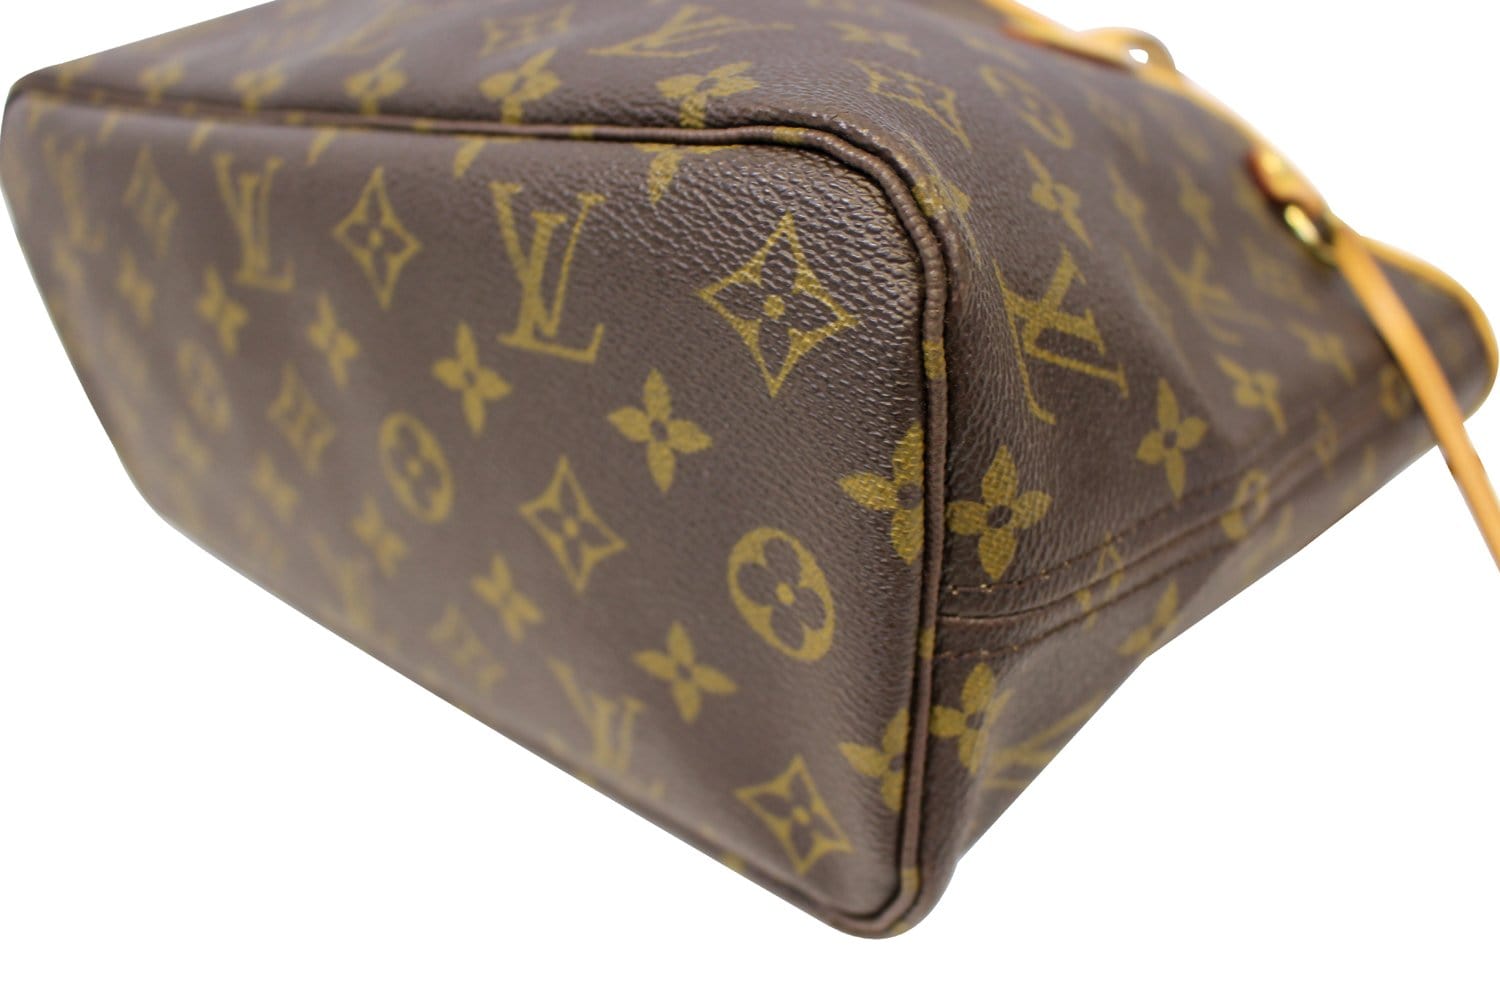 Louis Vuitton Neverfull PM Tote Bag in Classic LV Monogram Canvas